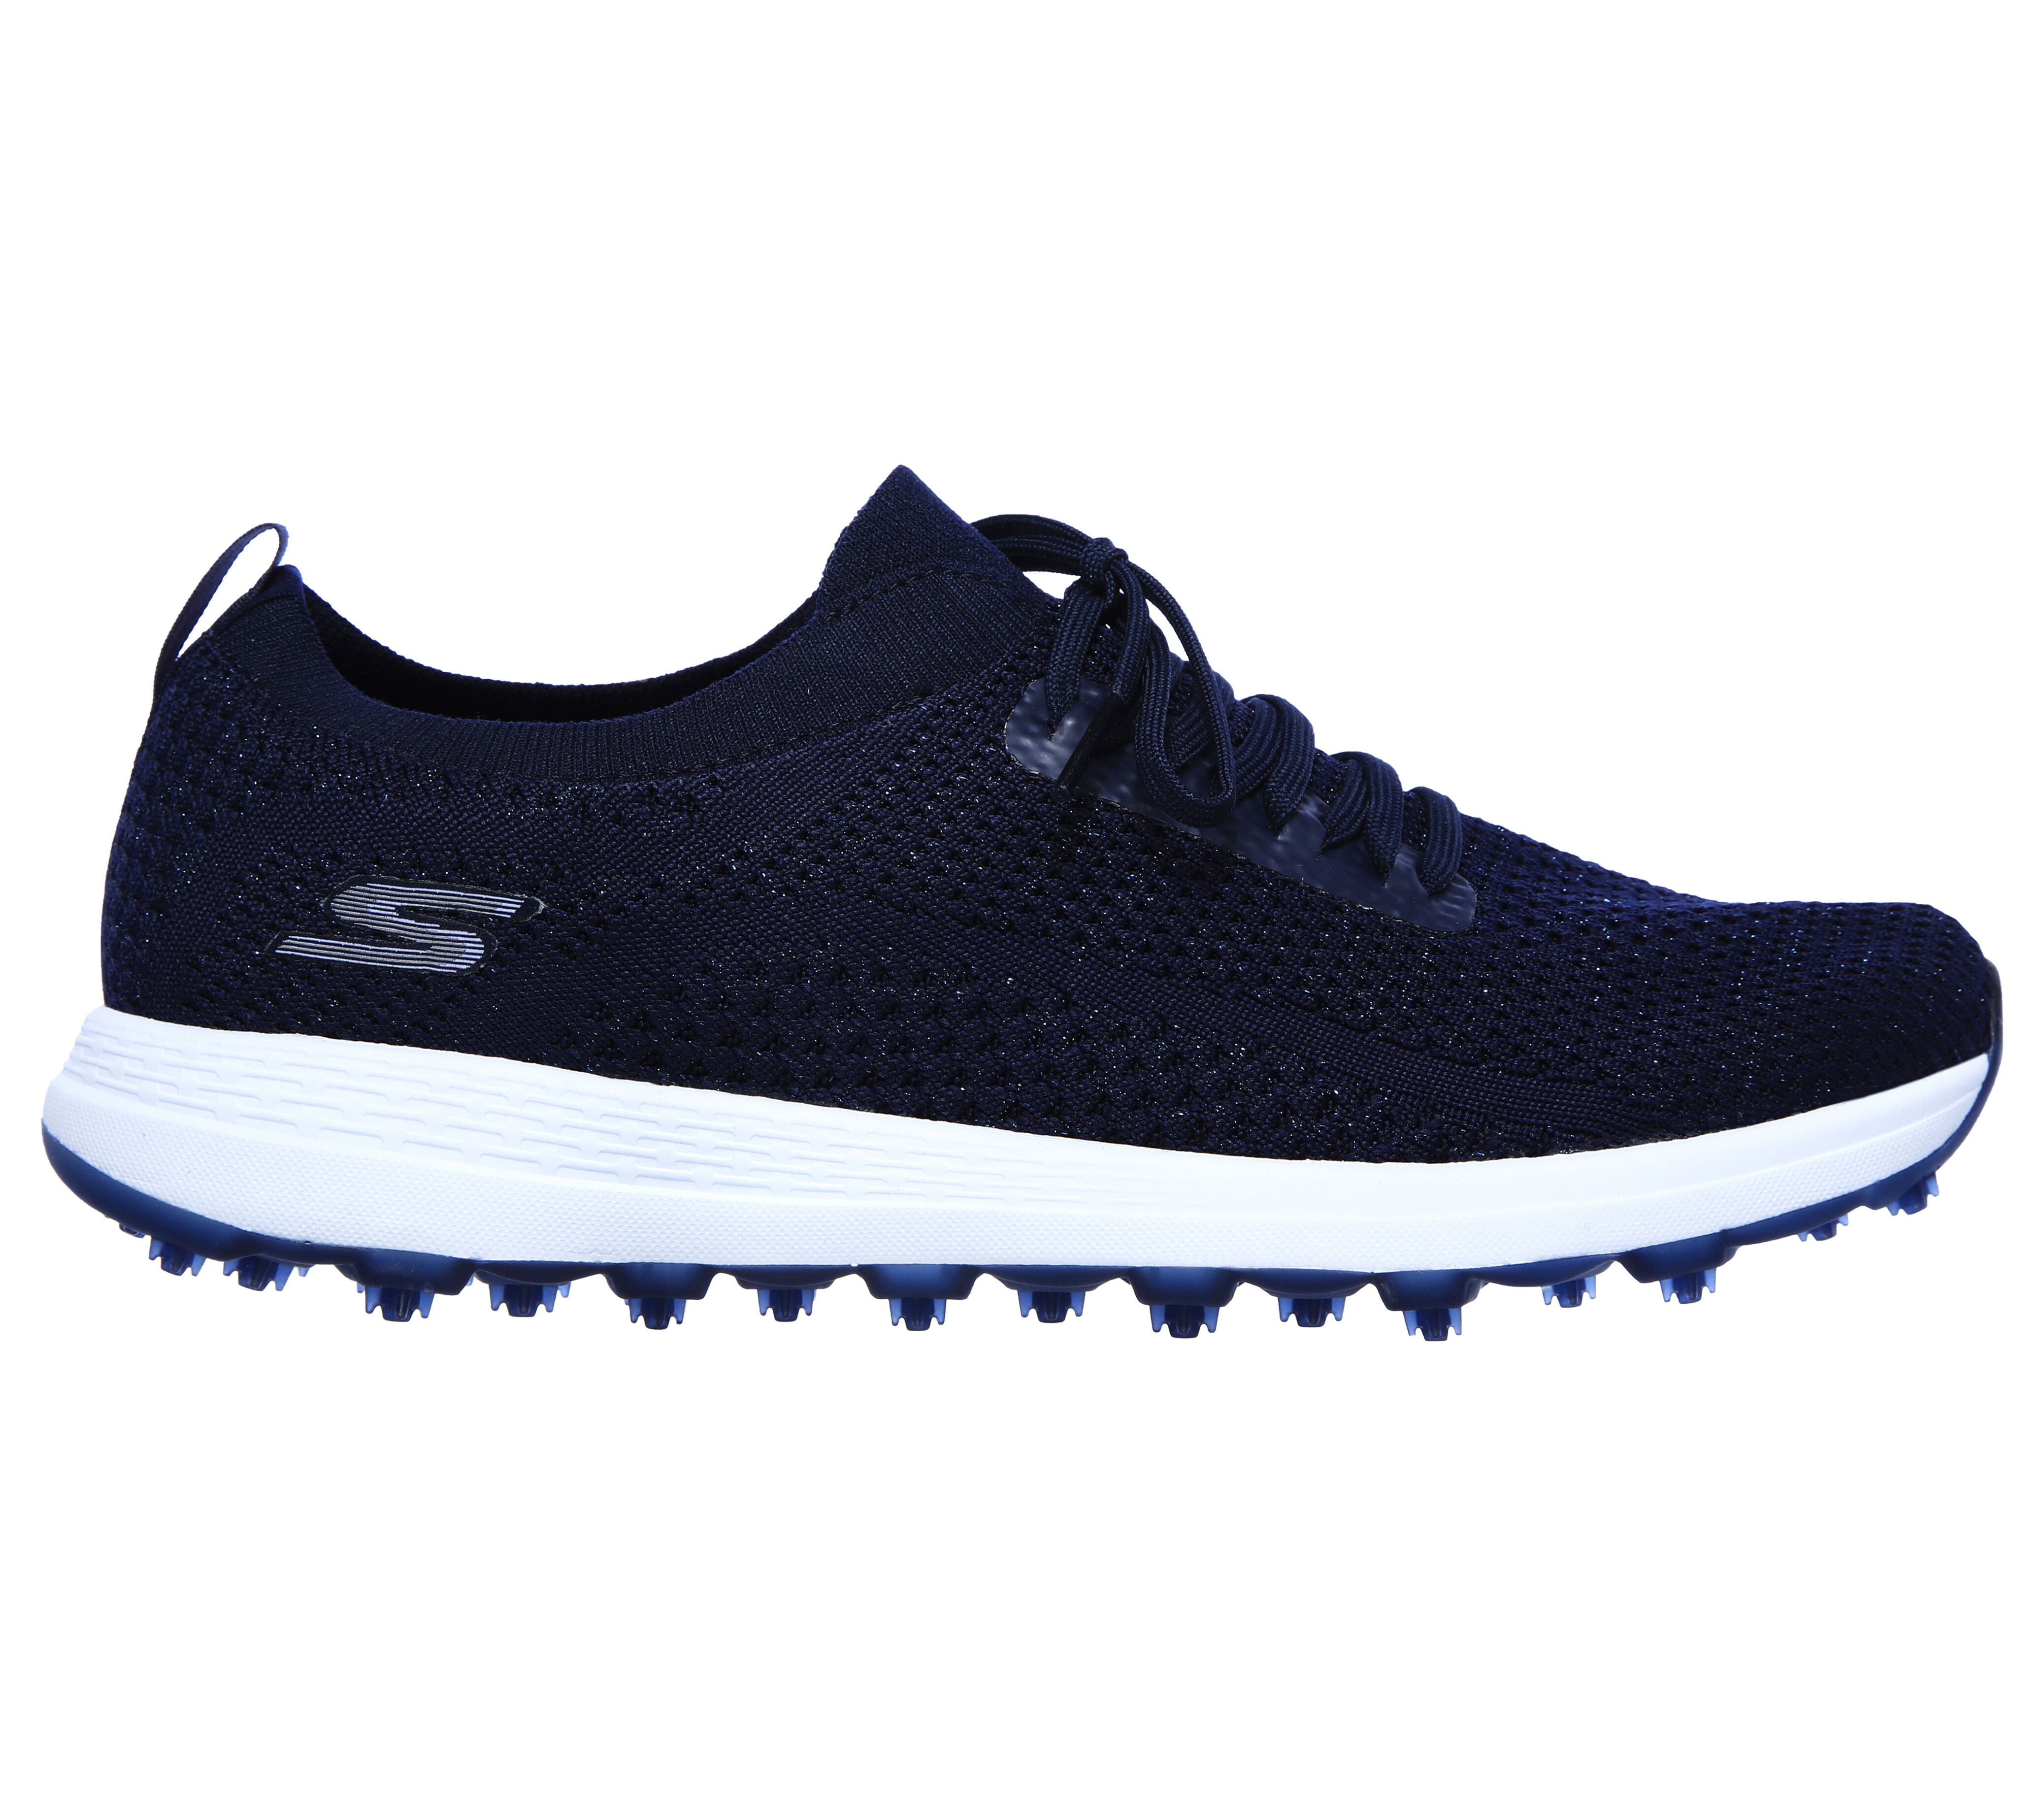 skechers golf shoes size 12